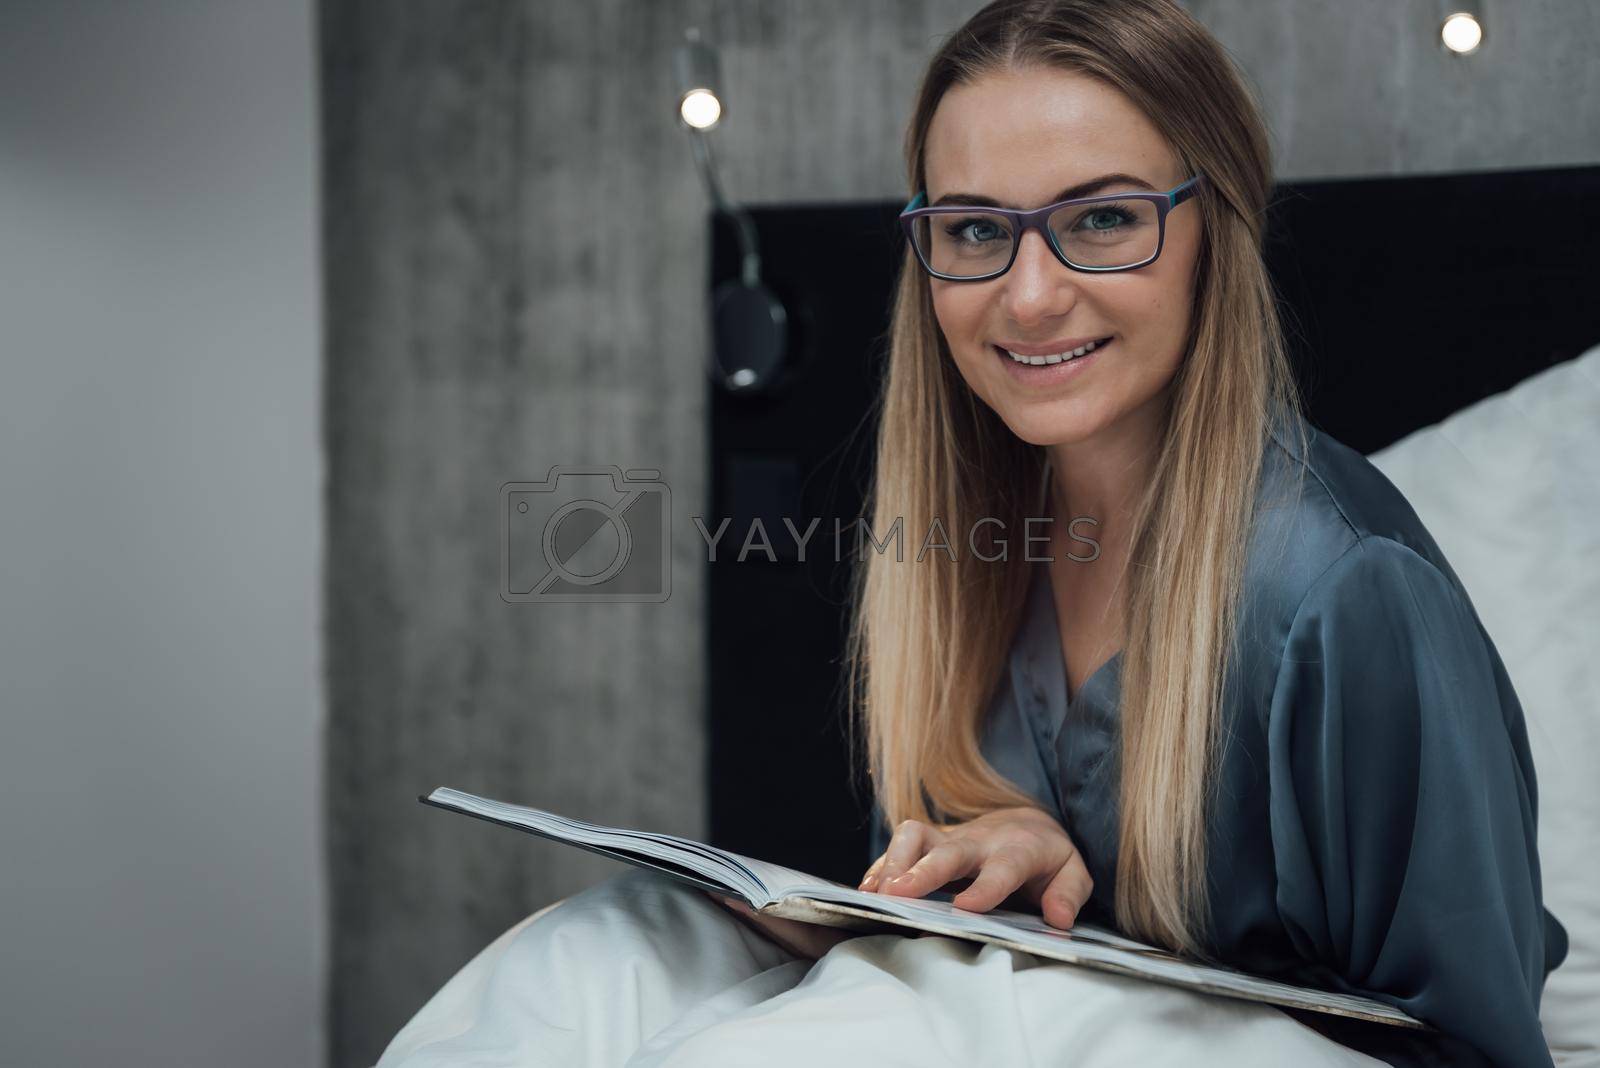 Royalty free image of Student Girl Studies by Anna_Omelchenko